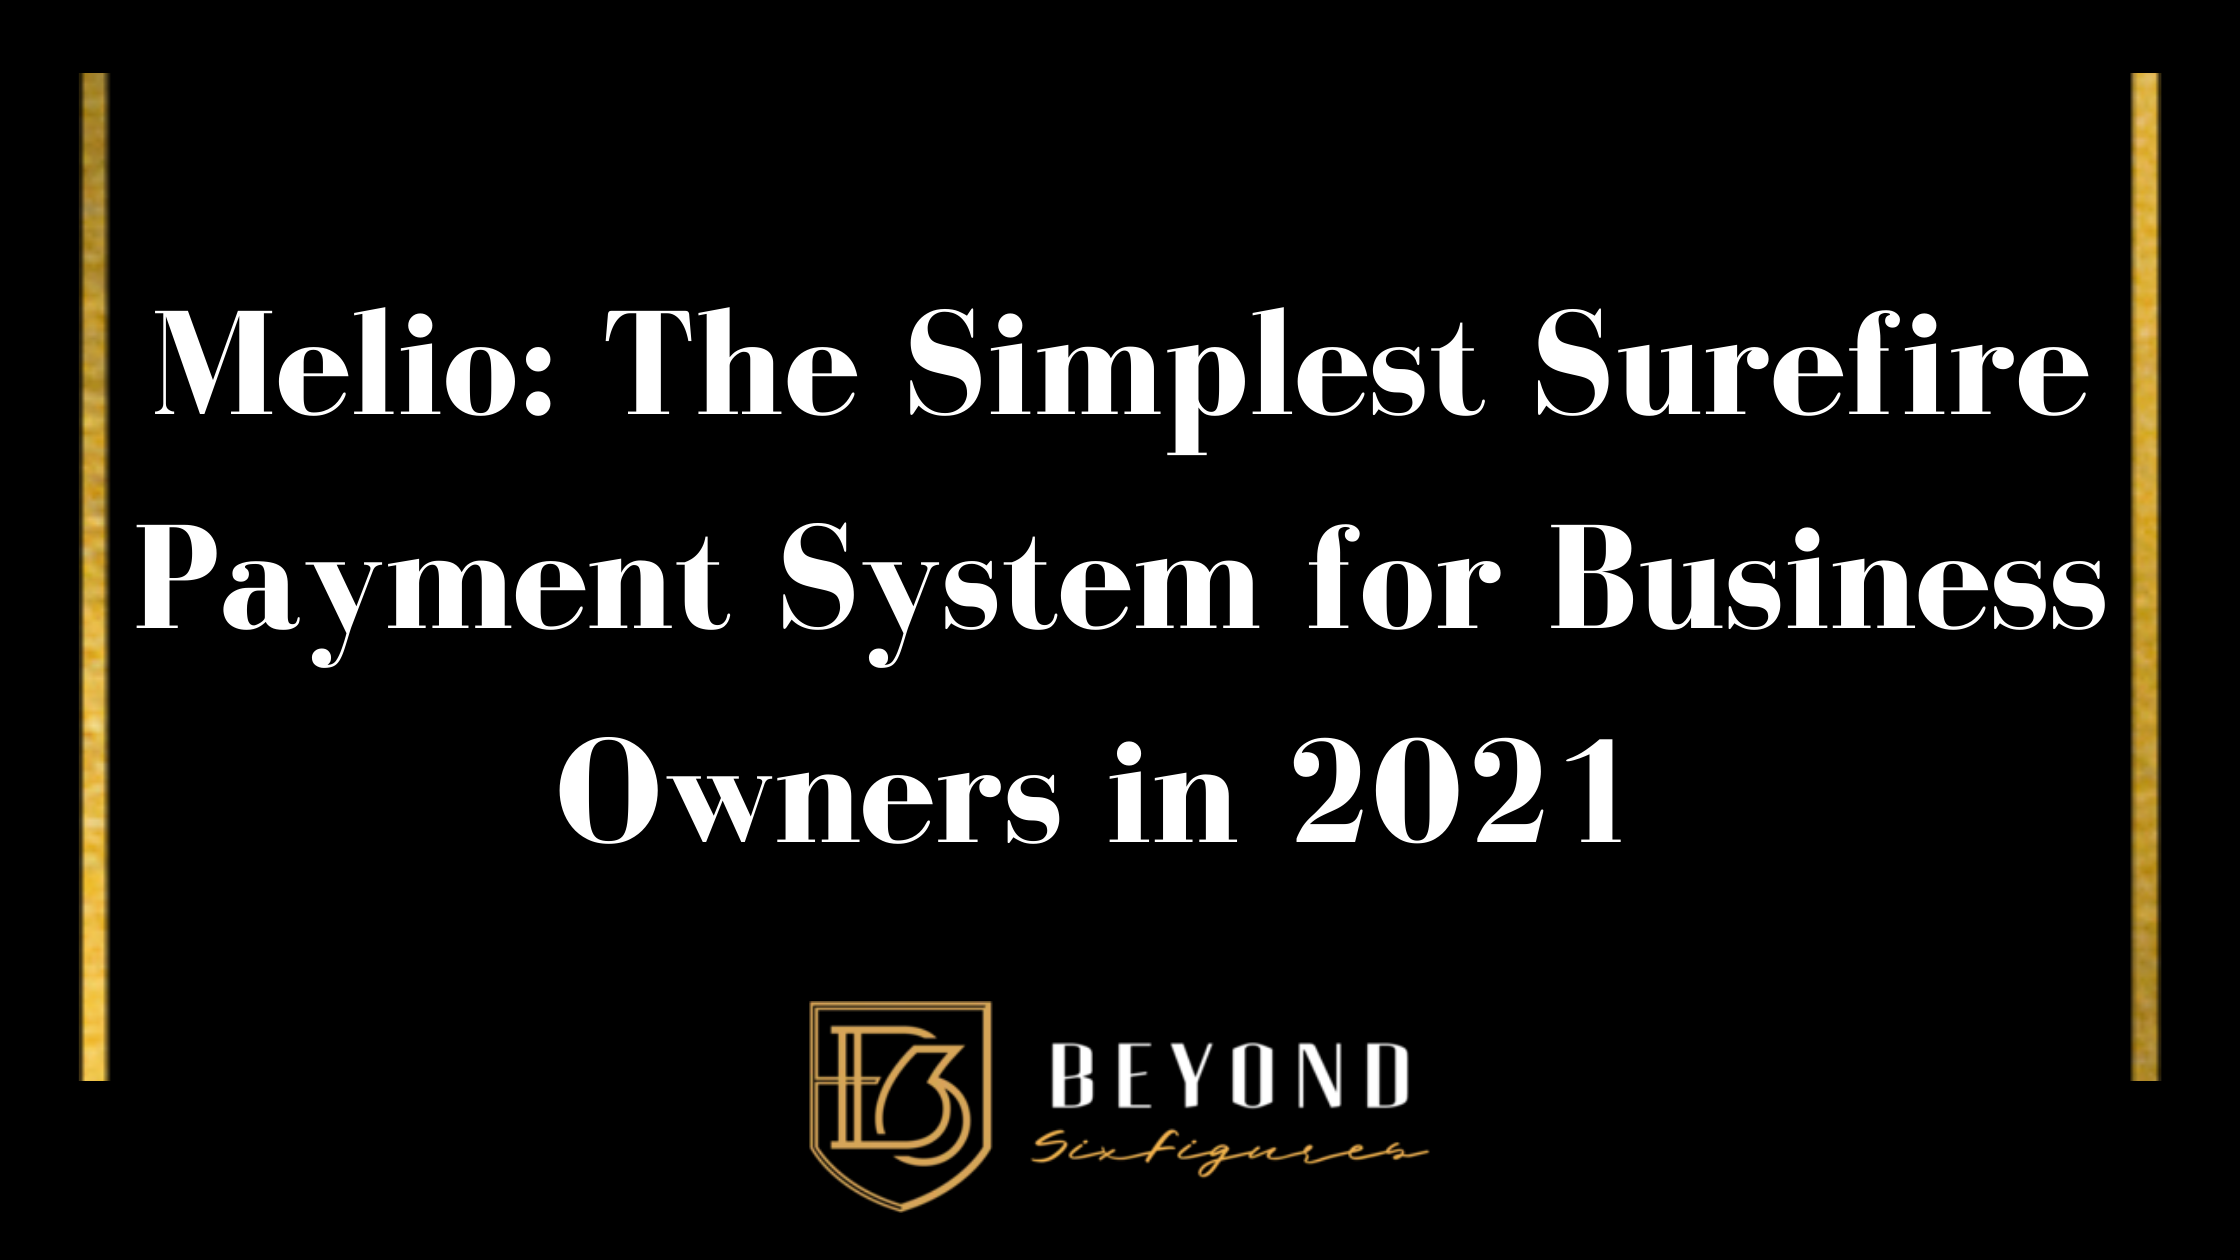 Blog banner that reads "Melio: The Simplest Surefire Payment System for Business Owners in 2021 "